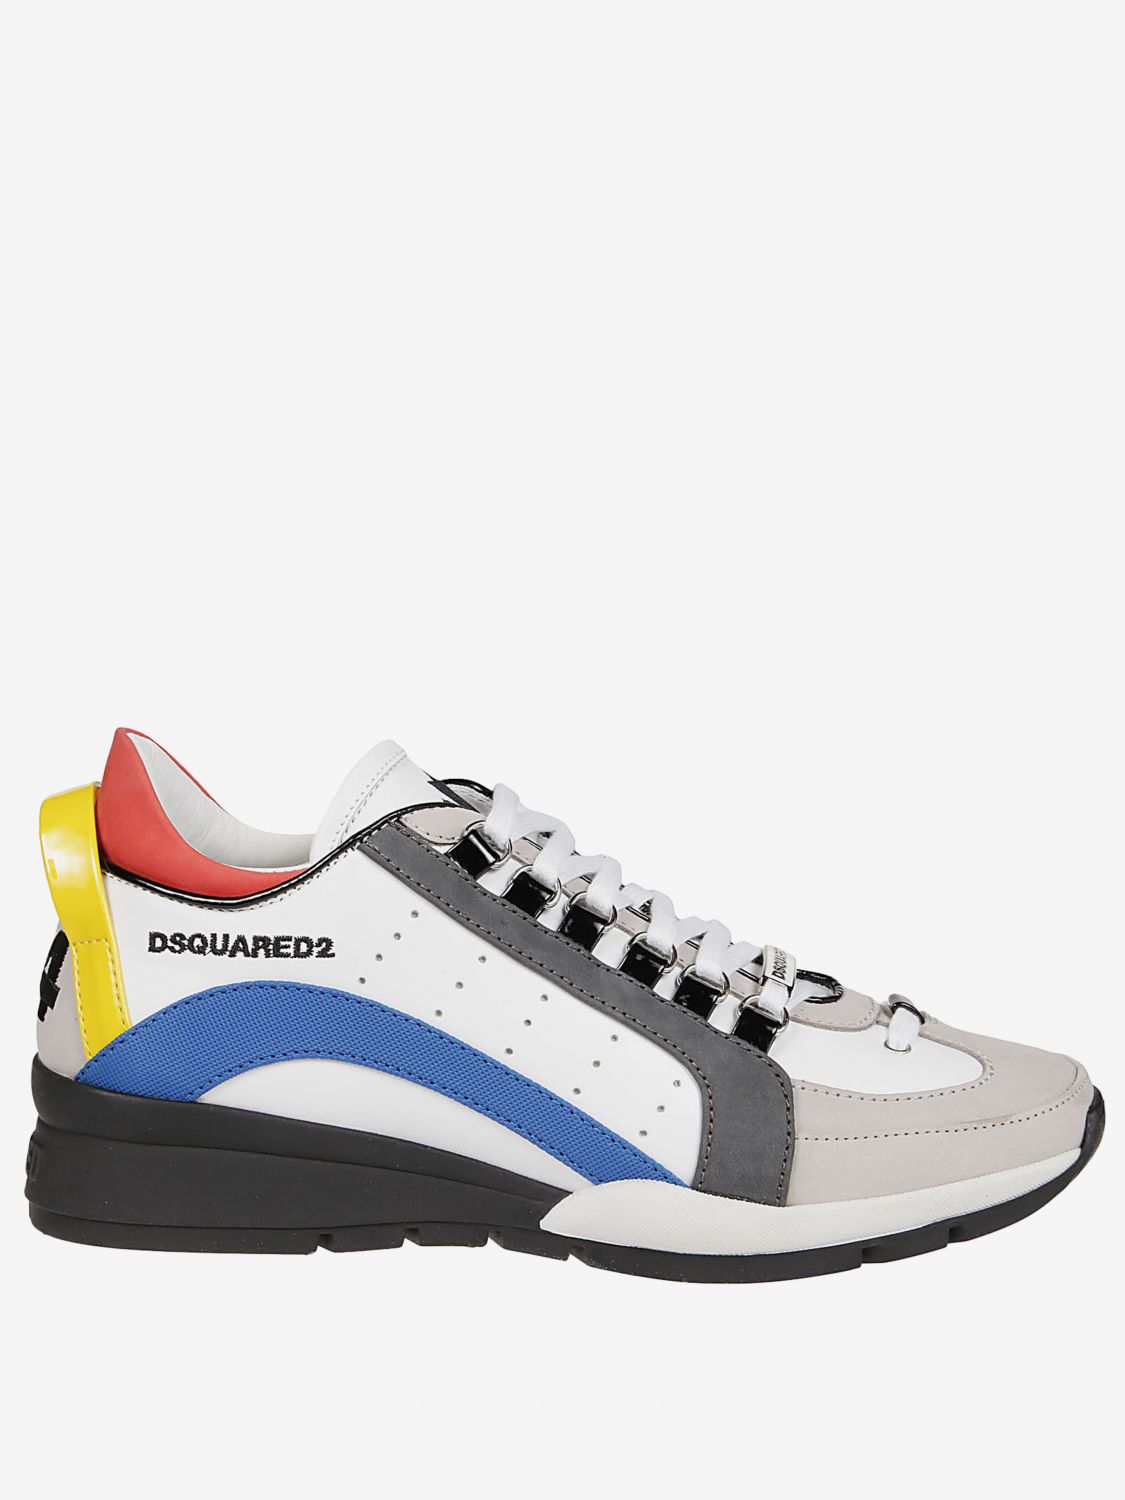 mens dsquared2 trainers